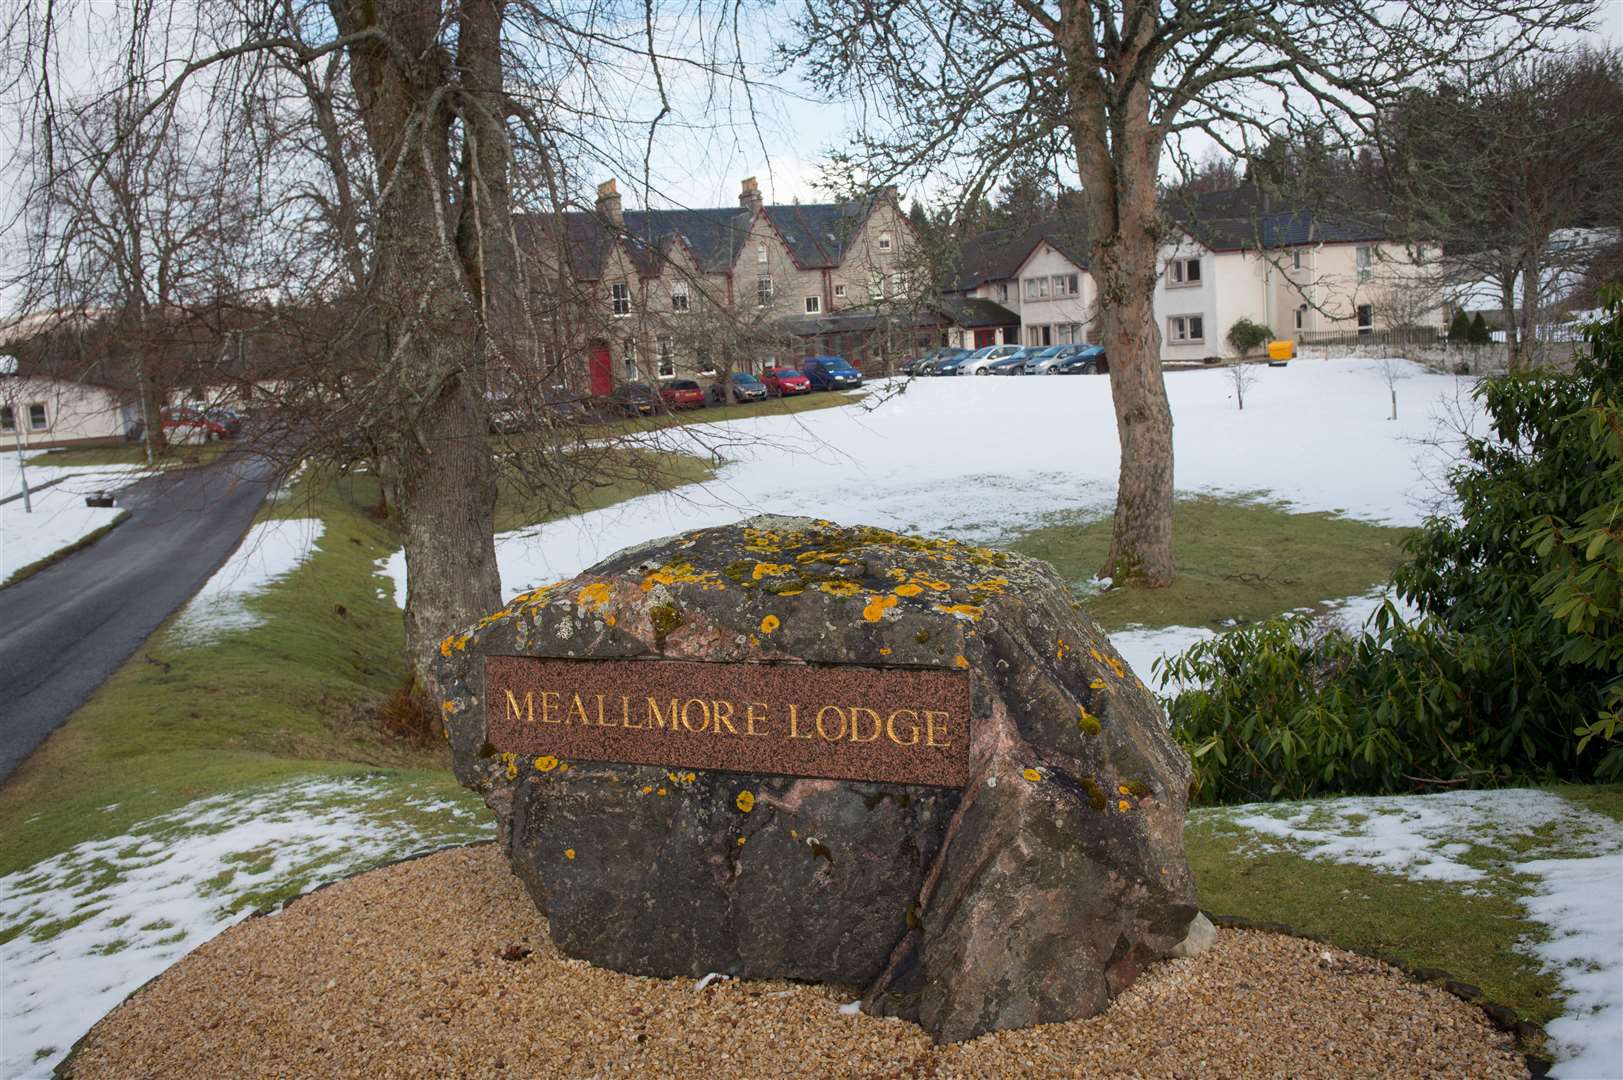 Meallmore Lodge is one of the care homes where visiting is now being restricted.